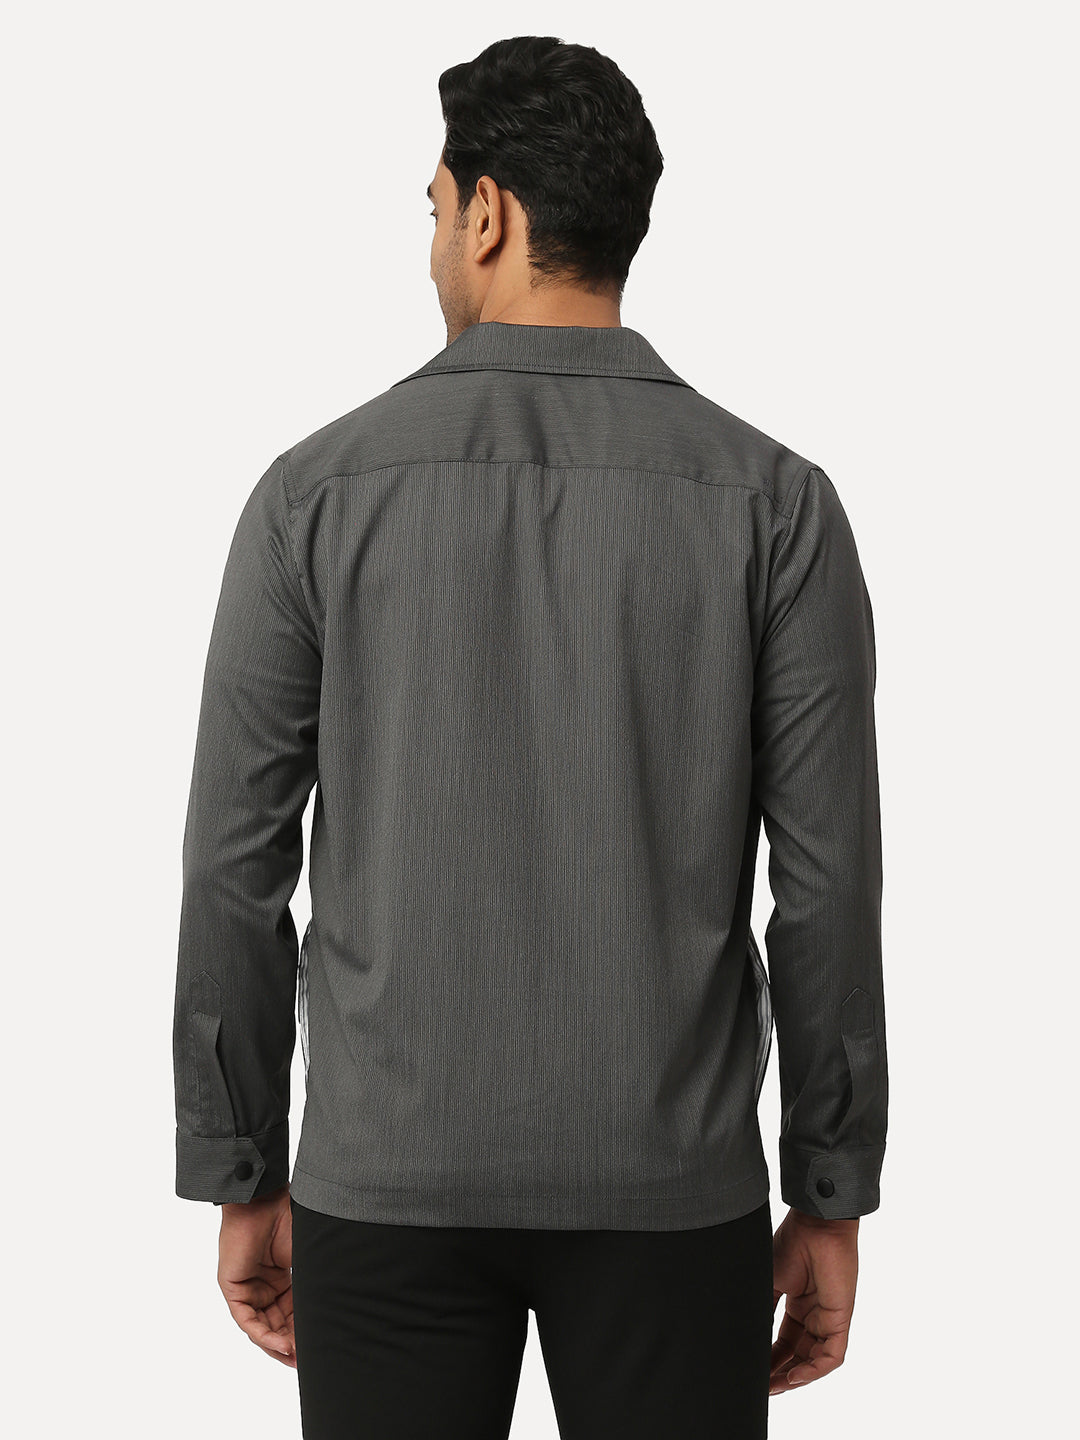 Soft Touch Black Linear Shacket